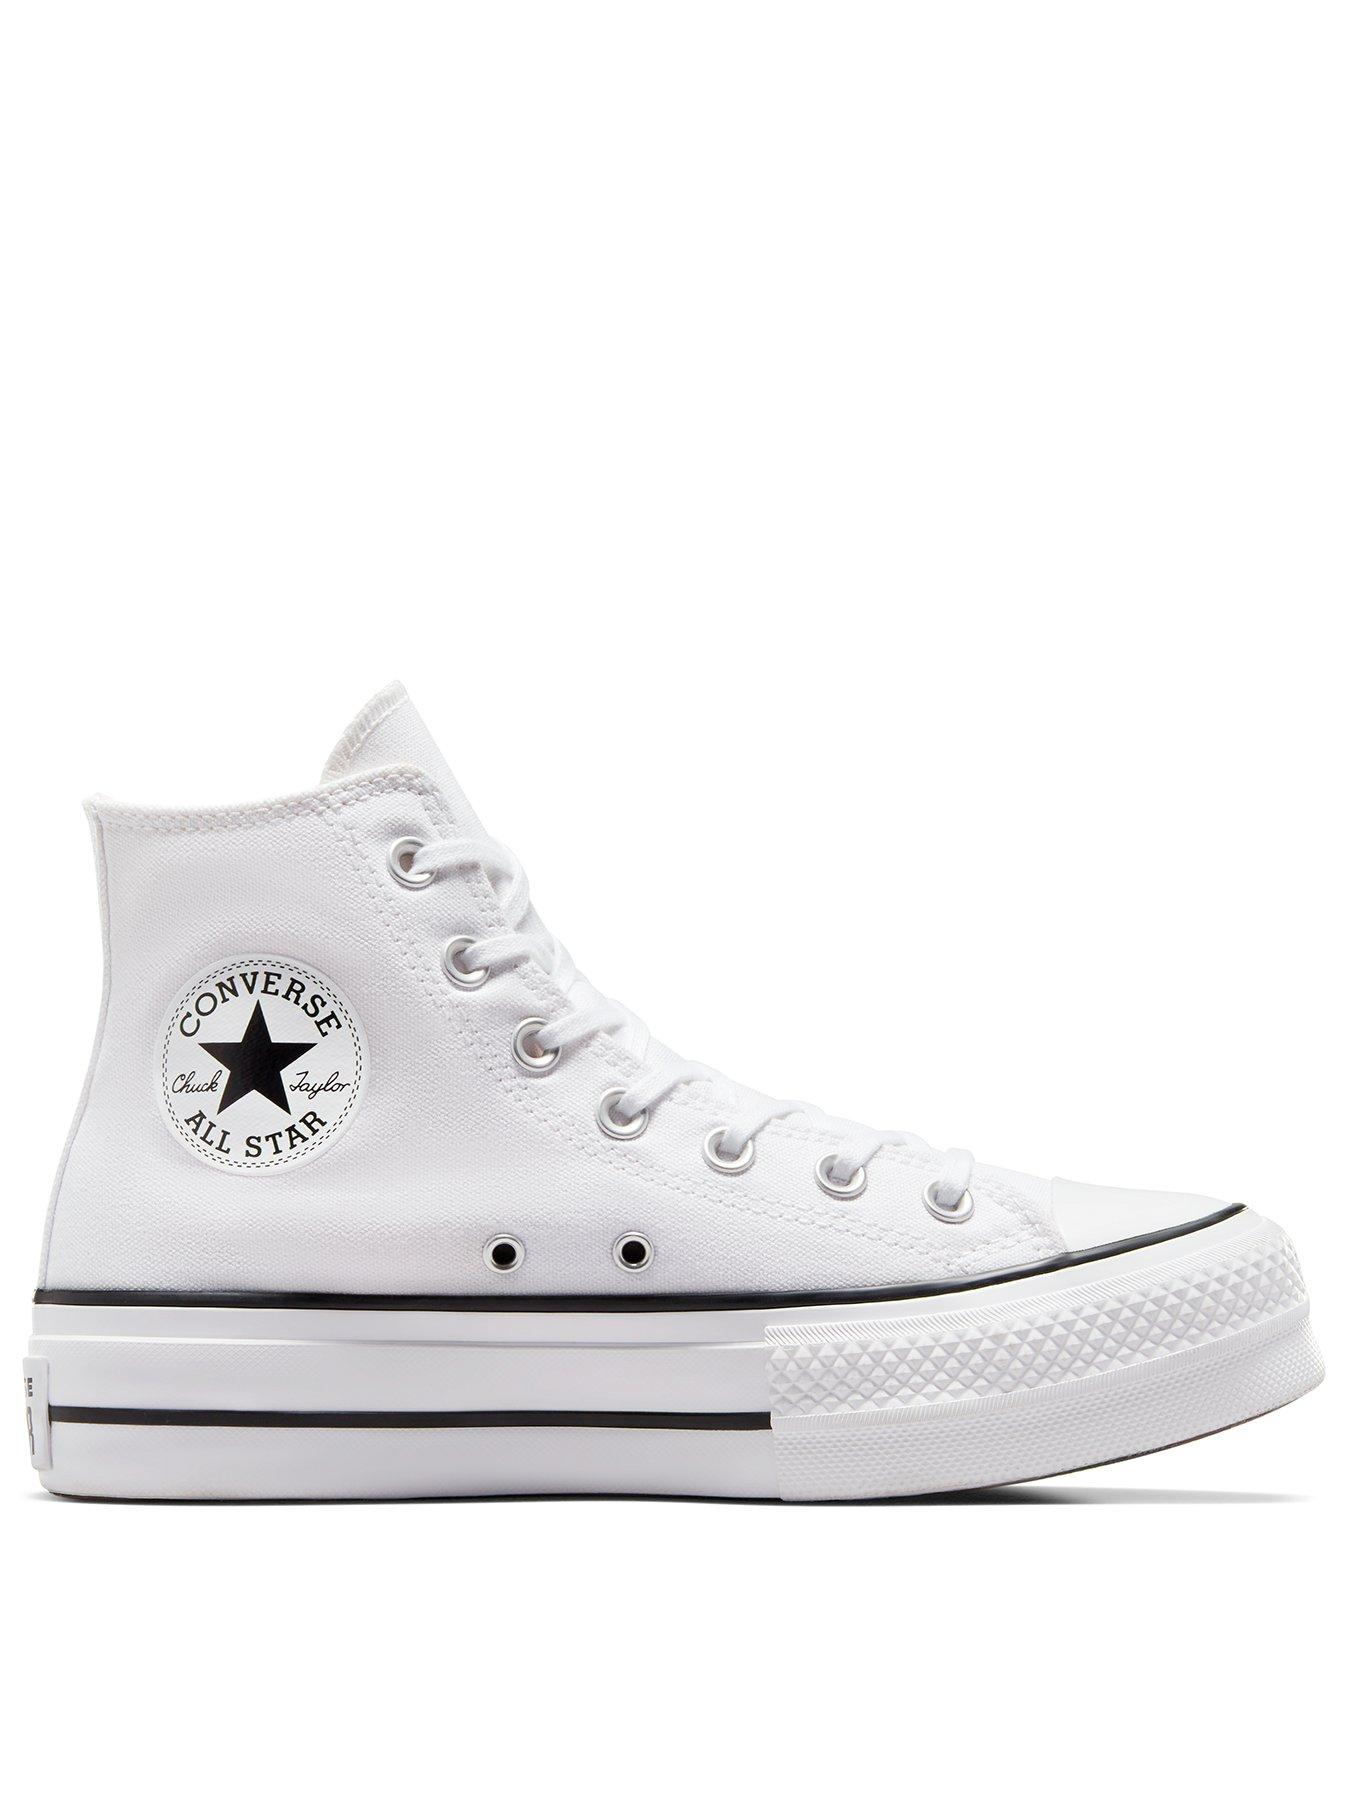 19 Insider Tips for Saving Money on Converse Shoes | by Koopy | Medium